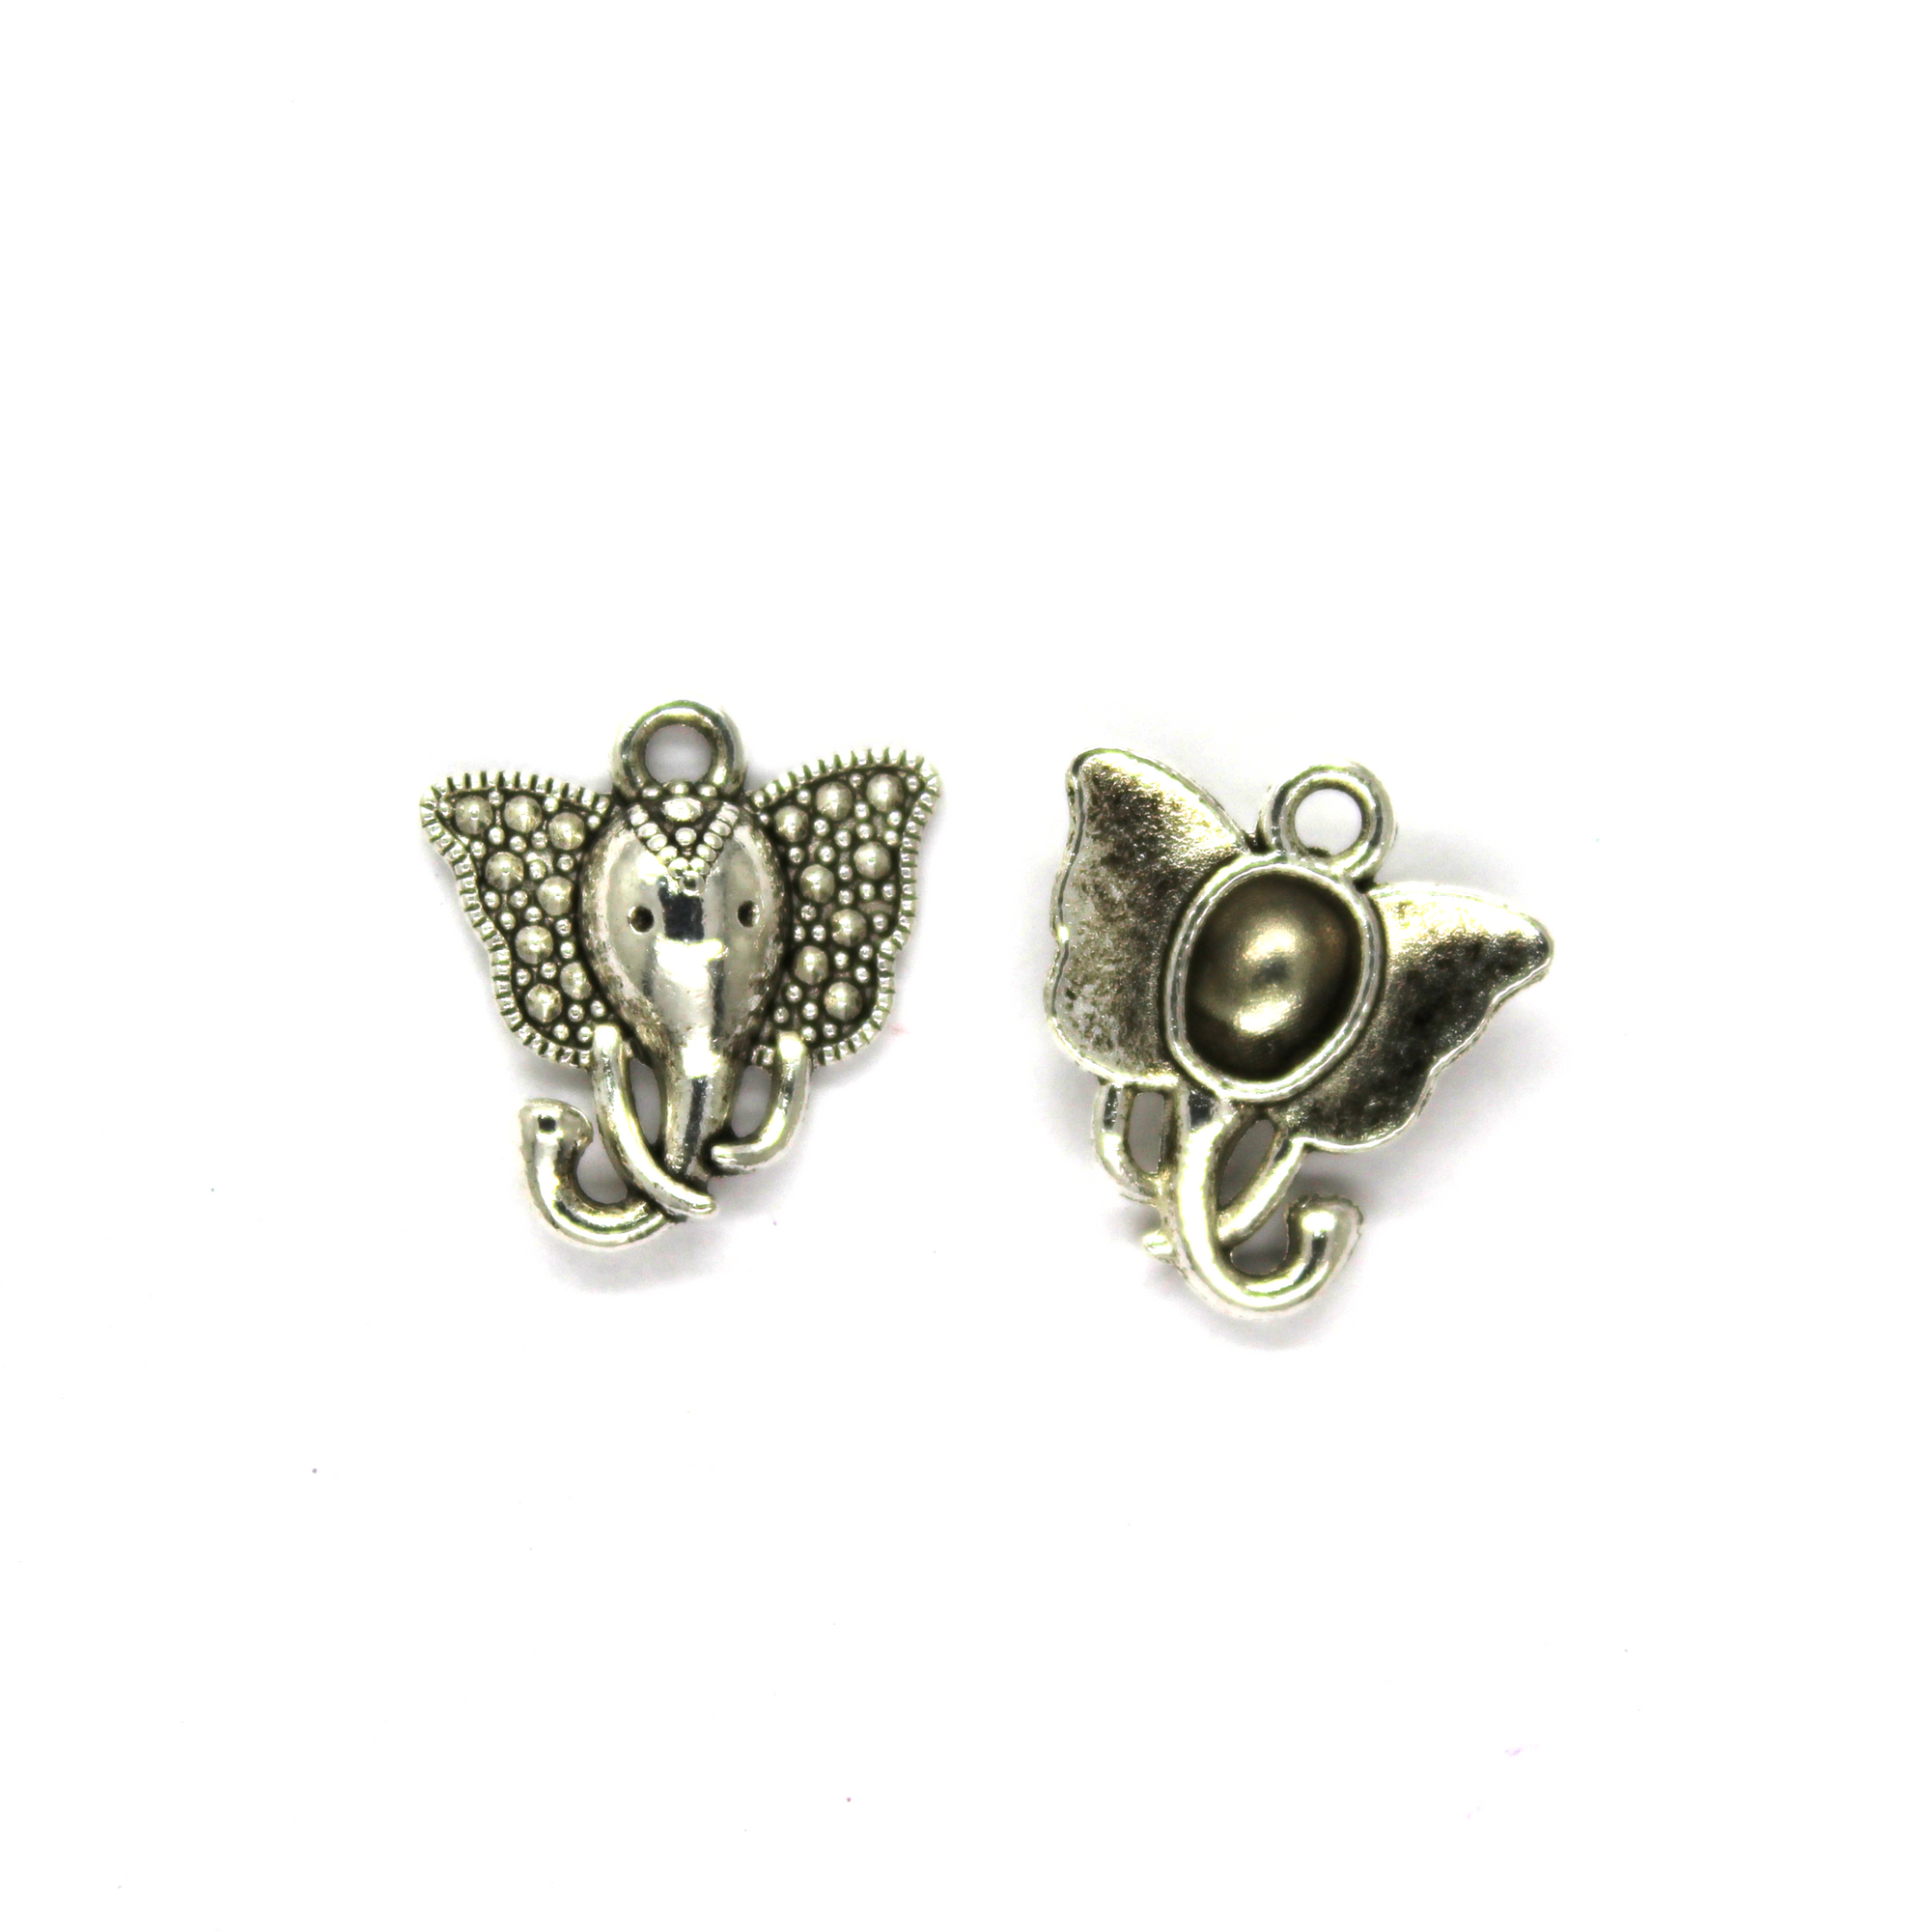 Charms, Elephant Head, Silver, Alloy, 16mm X 15mm, Sold Per pkg of 8